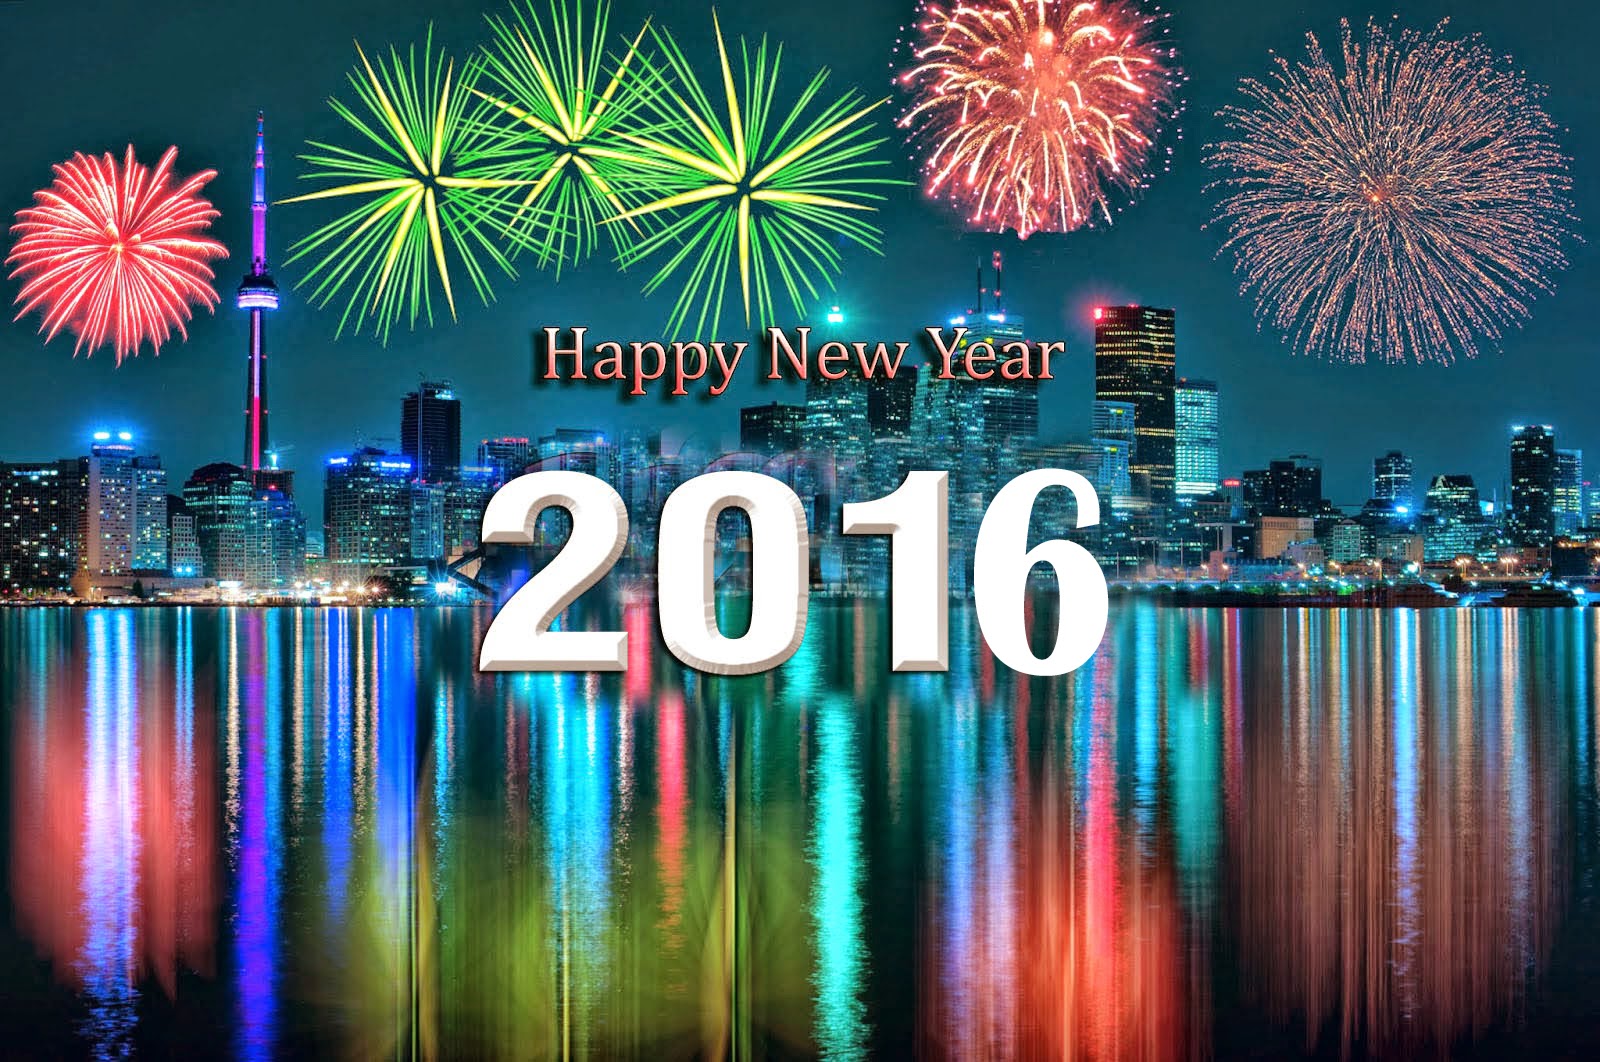 Beautiful Happy New Year Wallpapers HD (10)